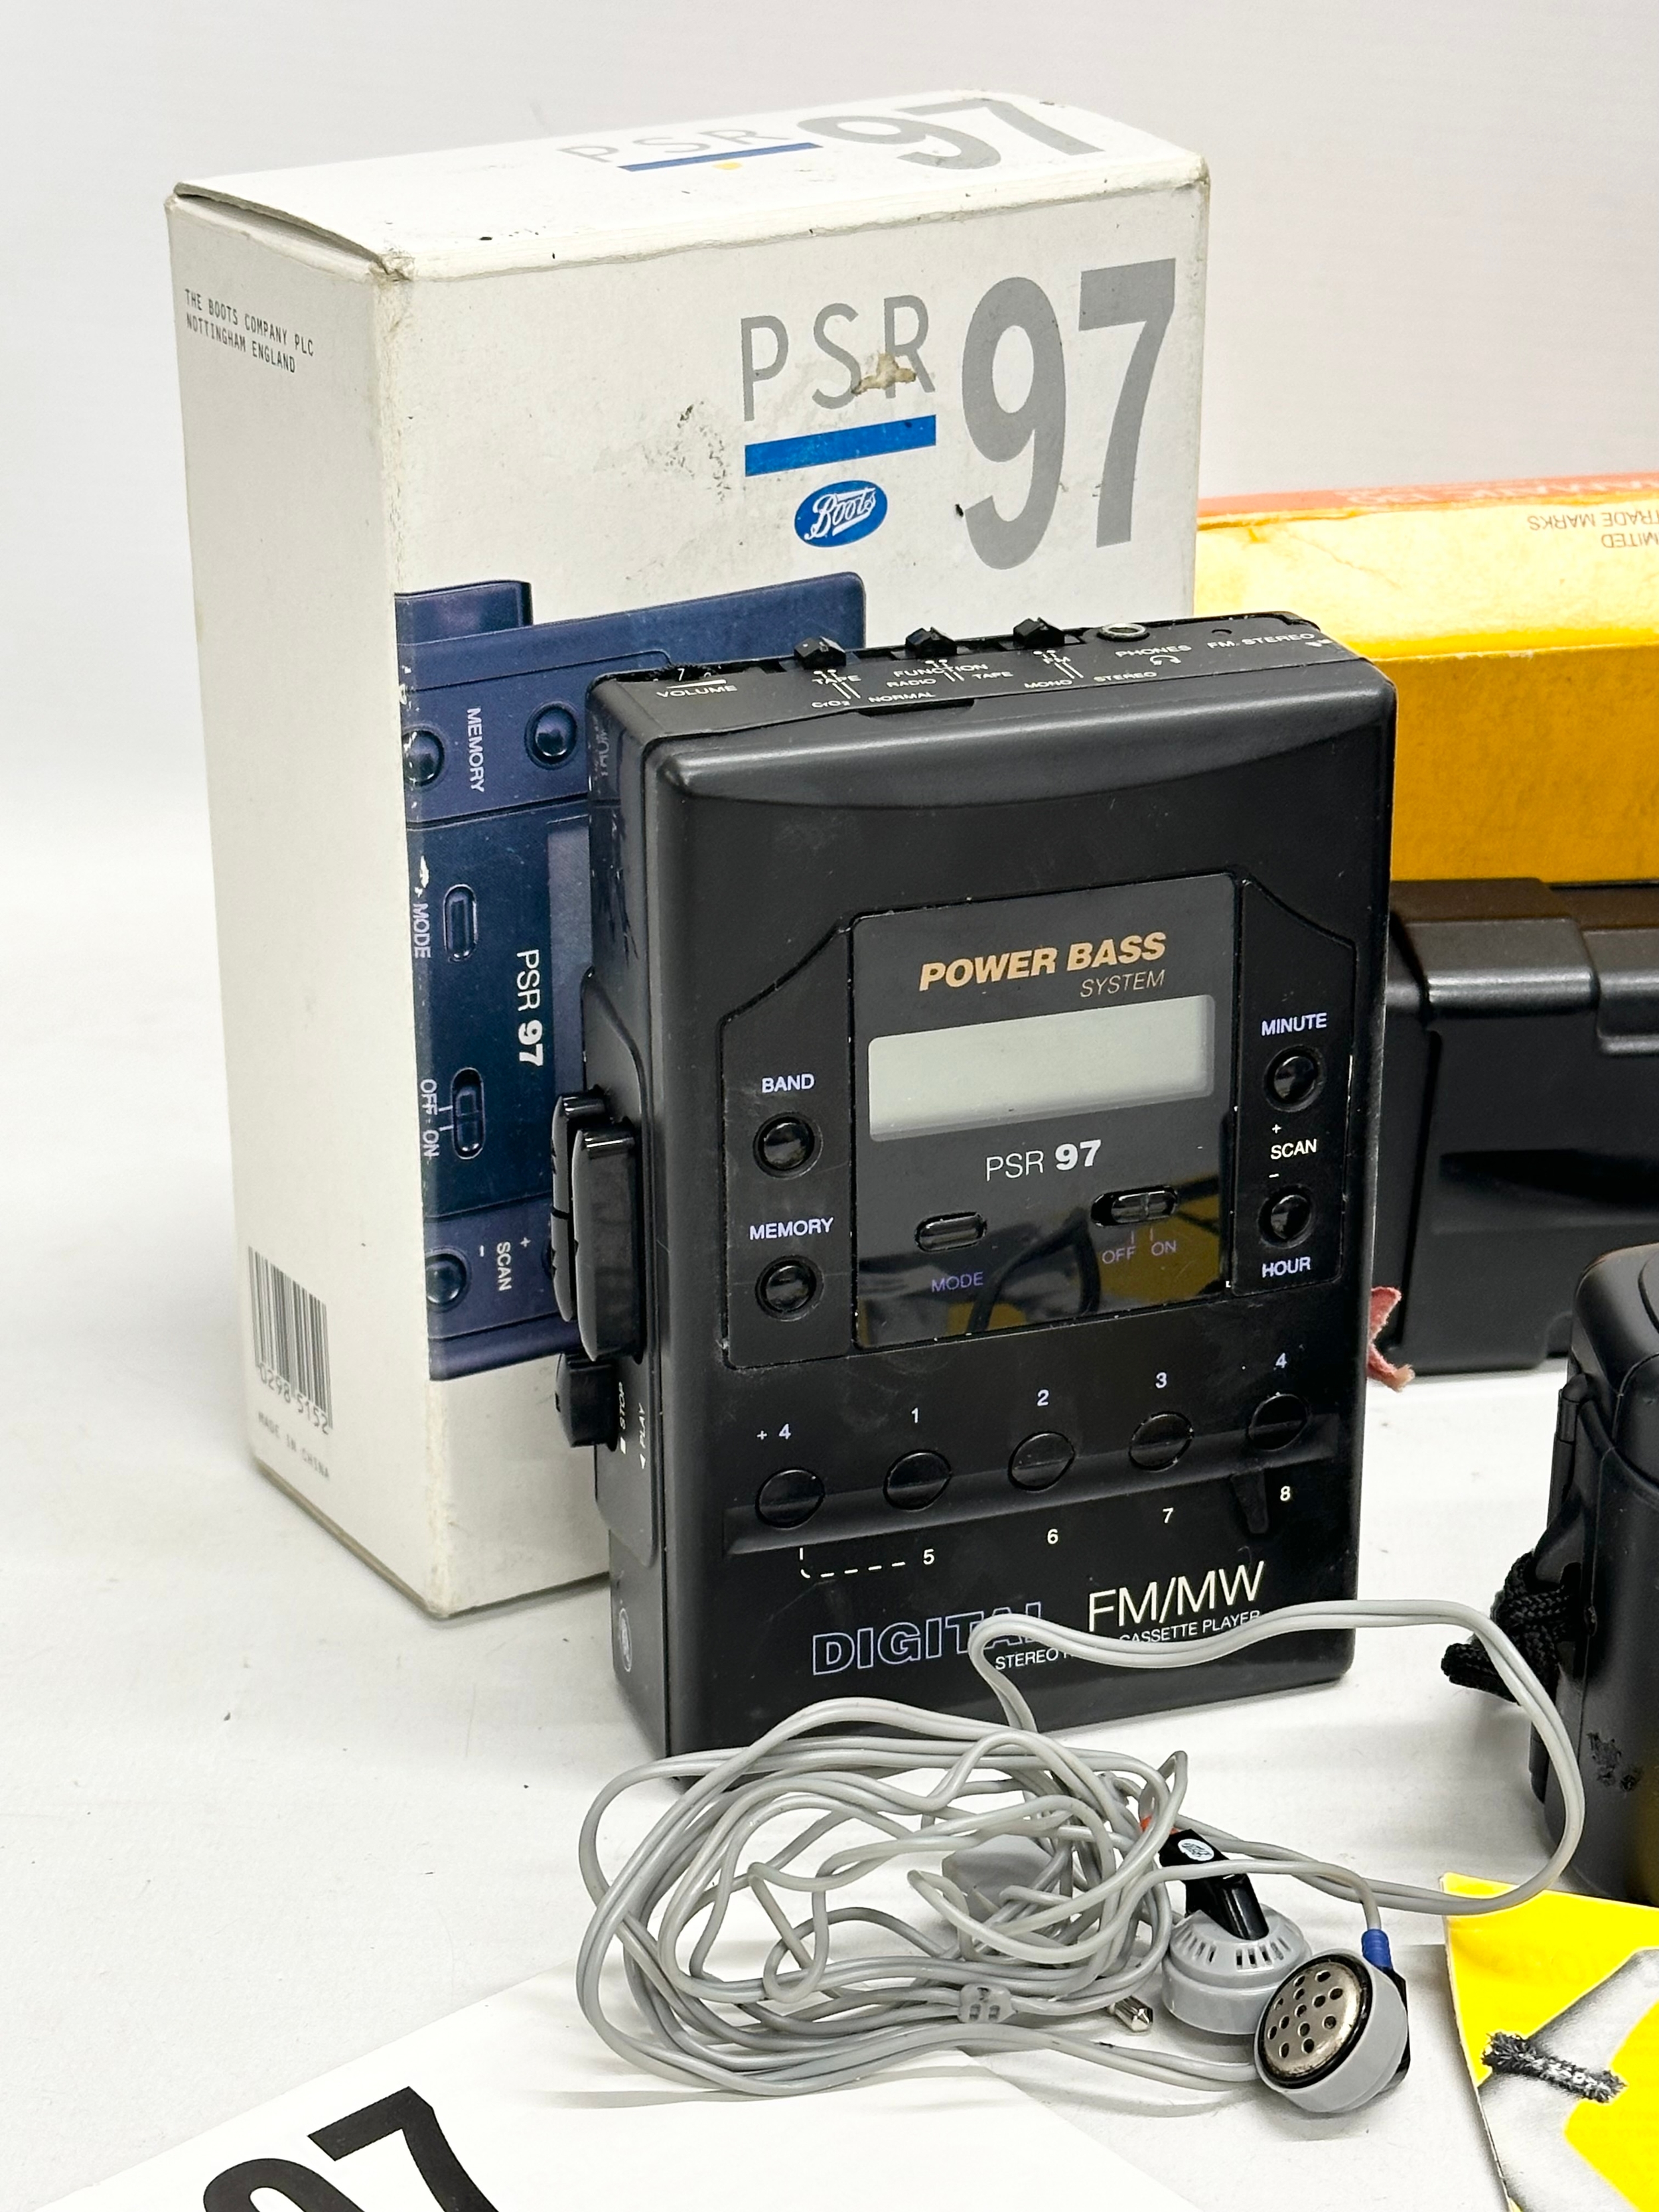 A collection of cameras and cassette player. A PSR 97 digital personal stereo radio cassette - Image 6 of 6